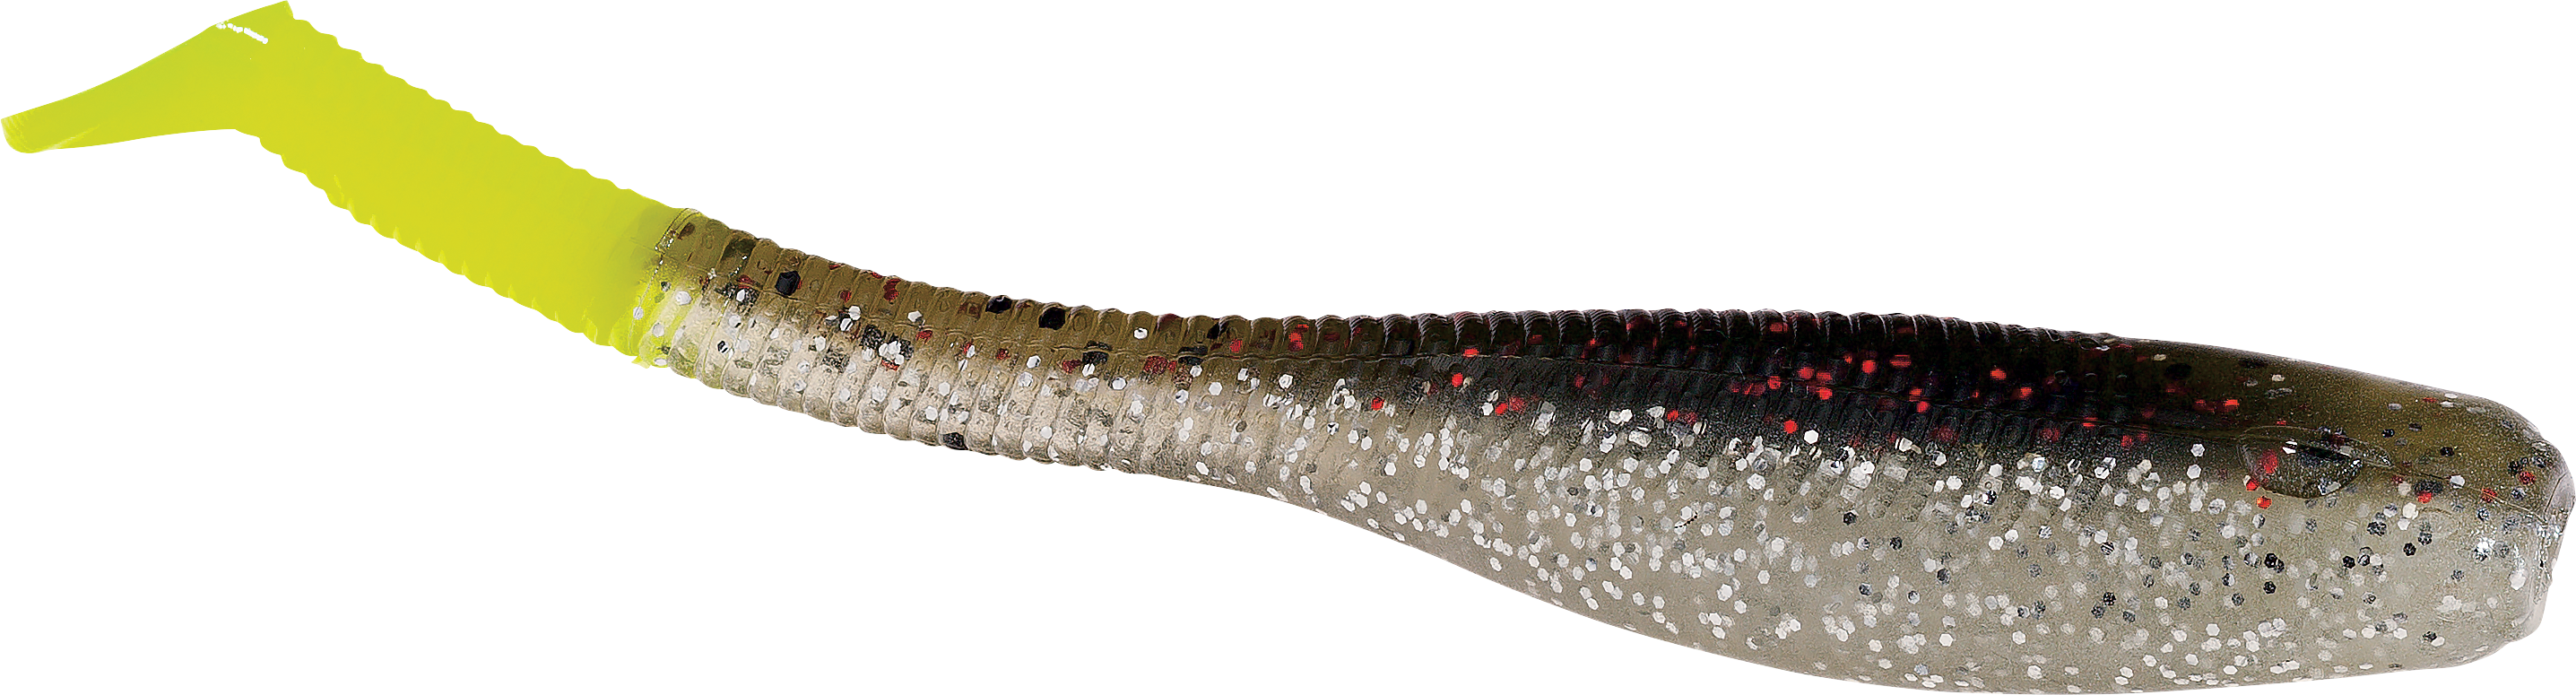 Down South Lures Saltwater Paddletail Swimbait 4-1/2 Watermelon  Red/Chartreuse Tail • Price »